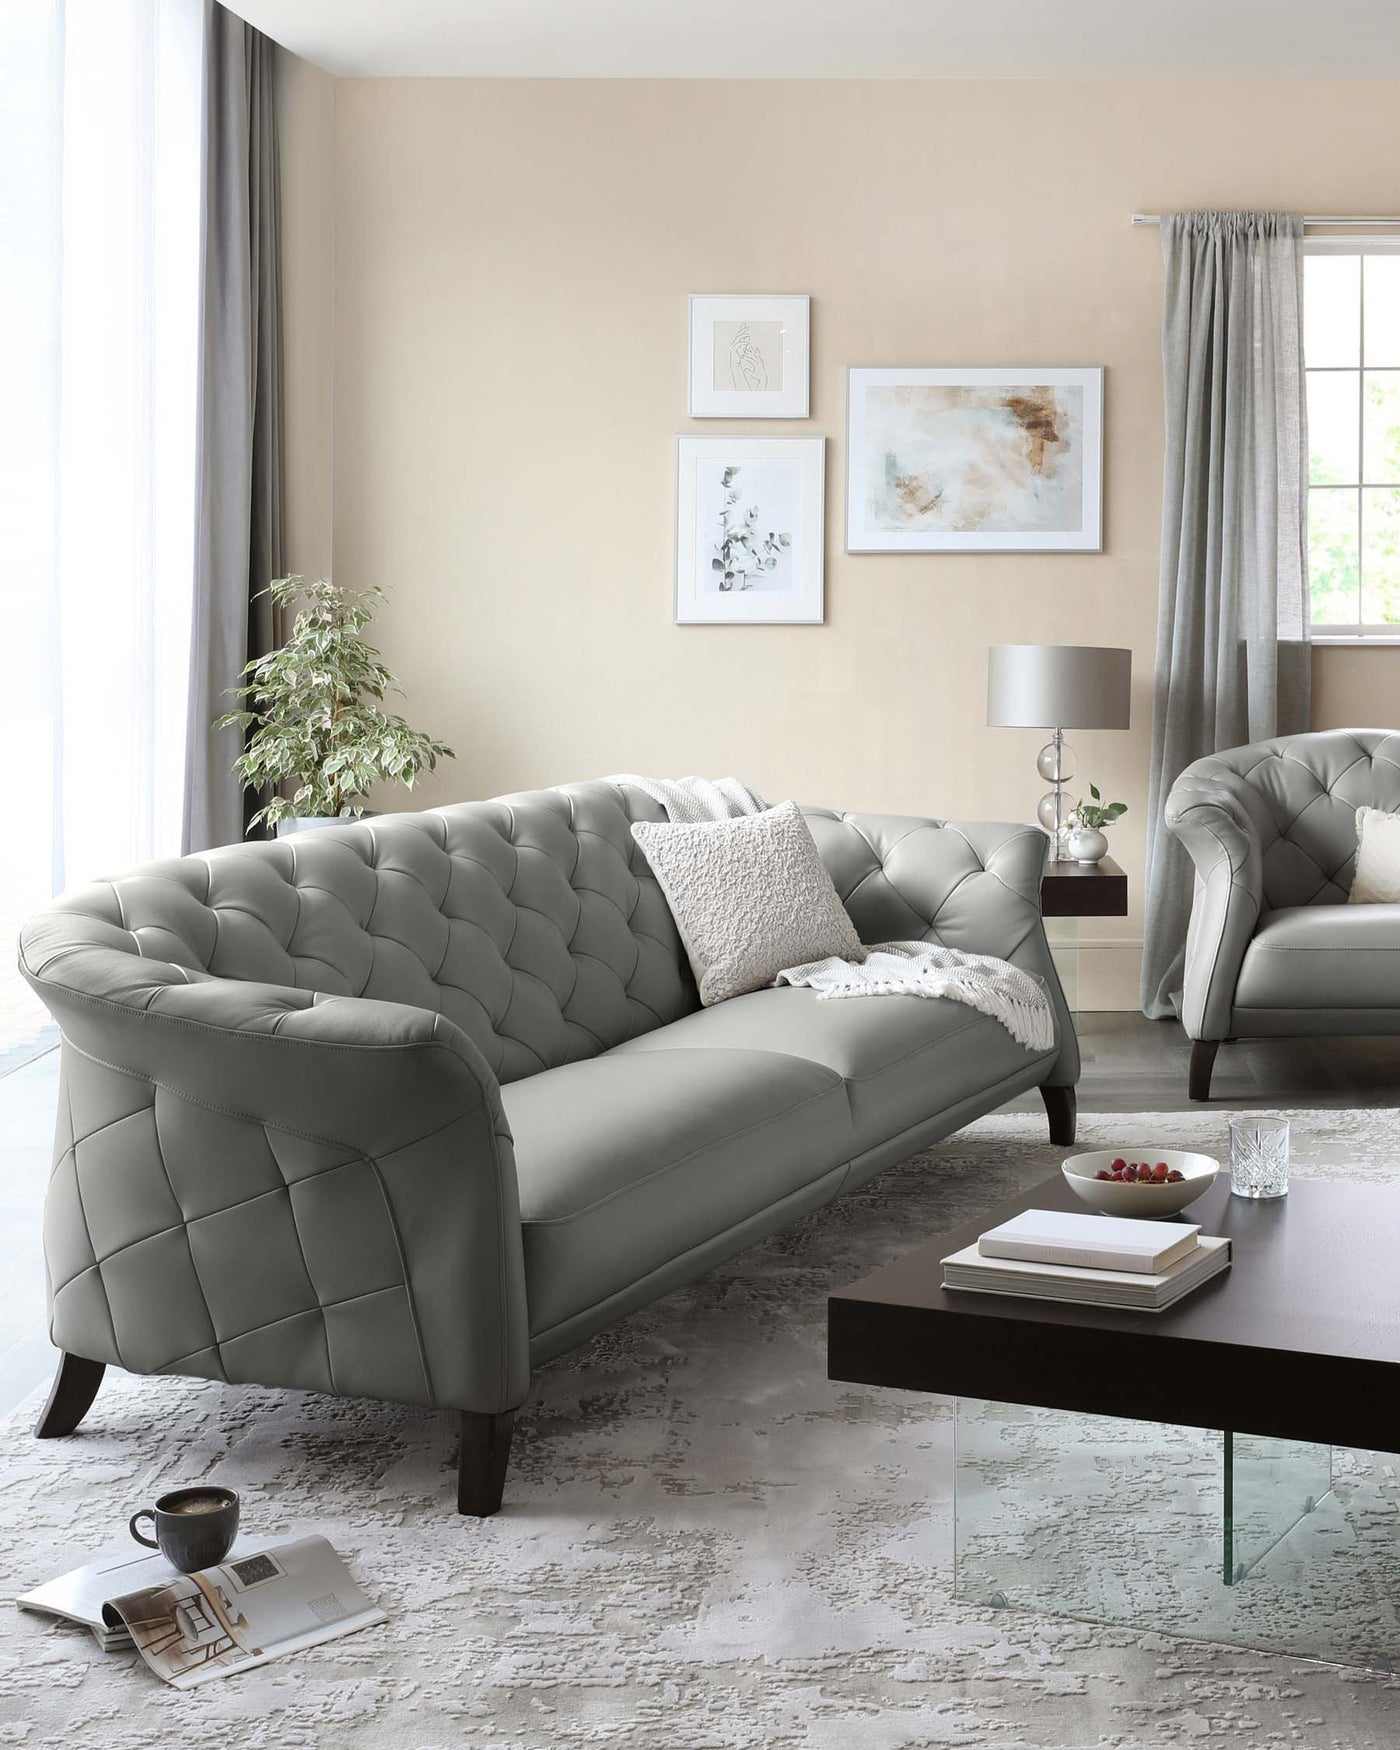 Elegant, grey tufted chesterfield sofa with matching armchair, featuring a plush design with deep button accents. In front, a modern, low-profile, rectangular coffee table with a dark wood finish and glass legs. The room enhances the sophisticated look with a textured white area rug, and a side table holding a lamp with a grey shade.